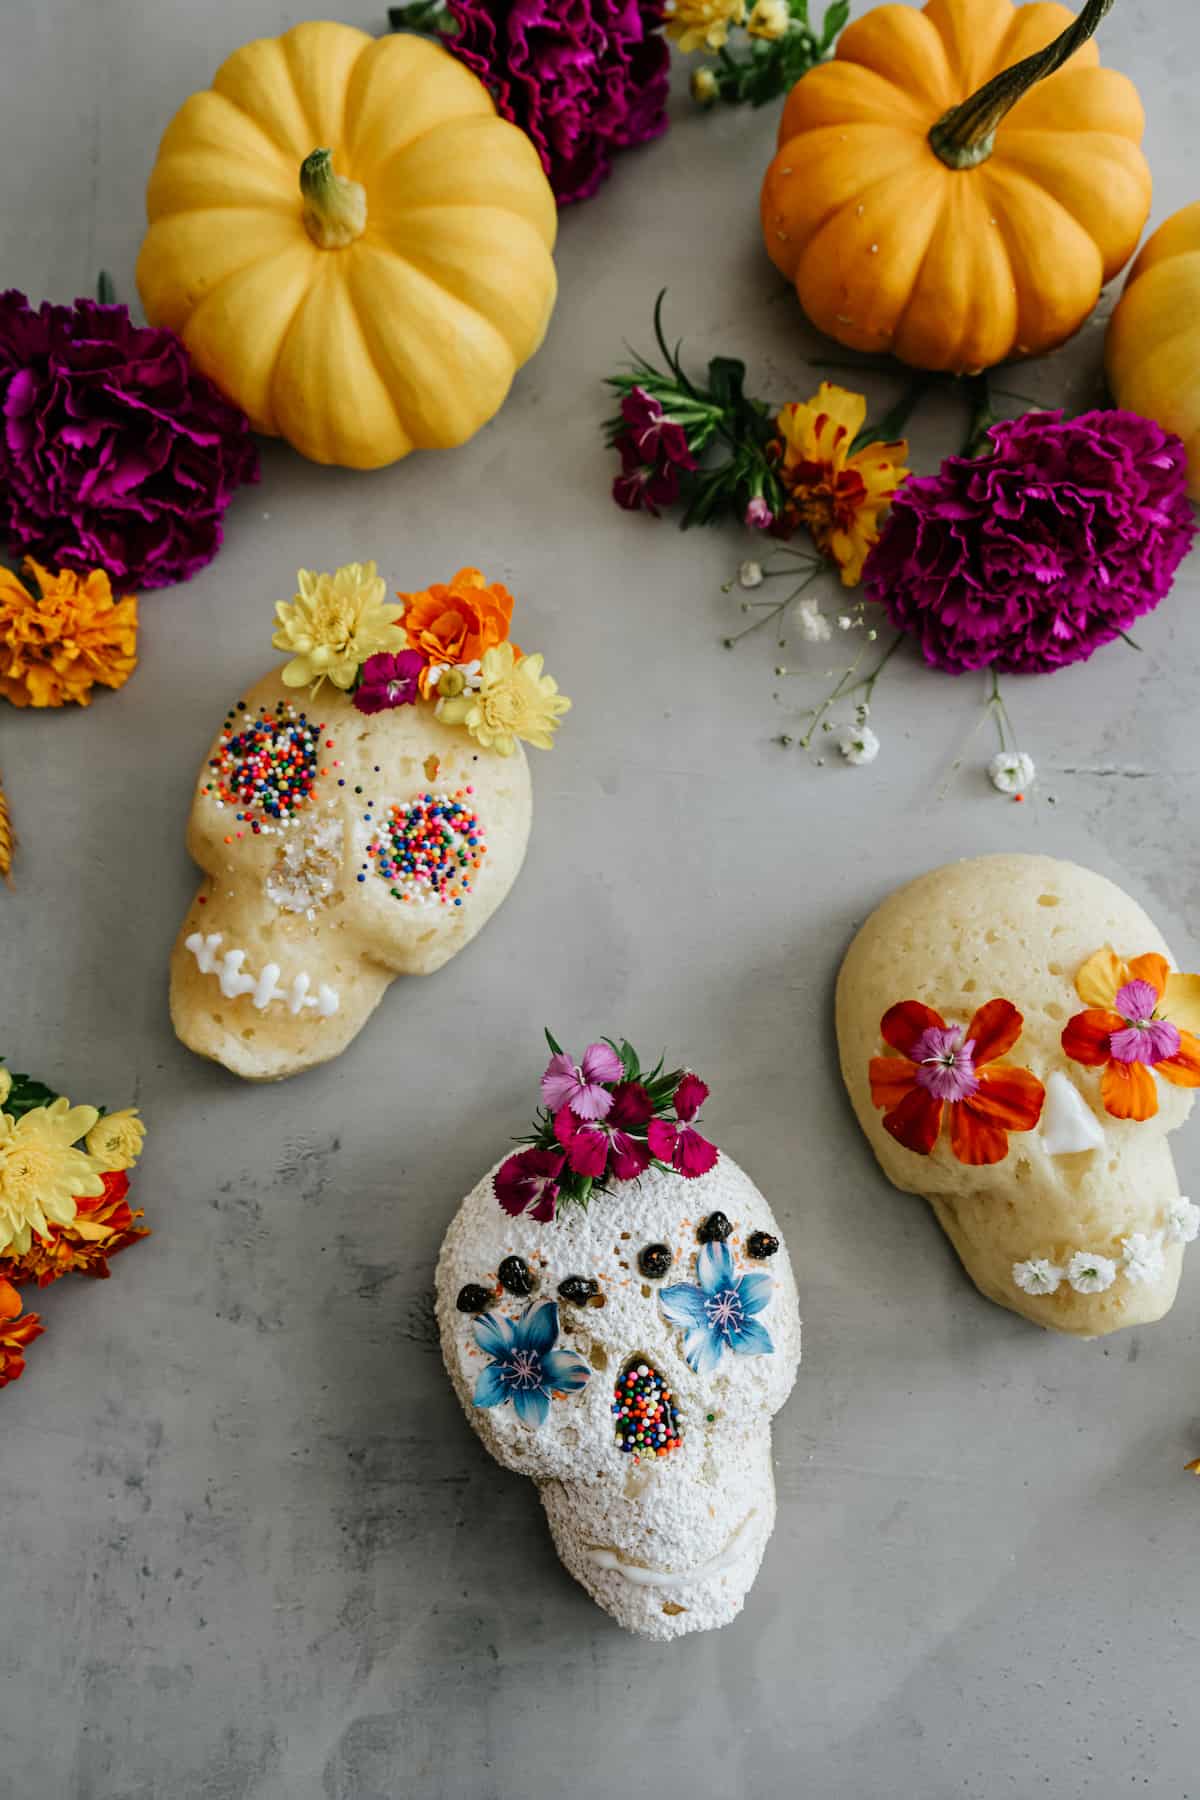 3 sugar skull cakes all decorated differently on a grey table with an assortment of pumpkins.